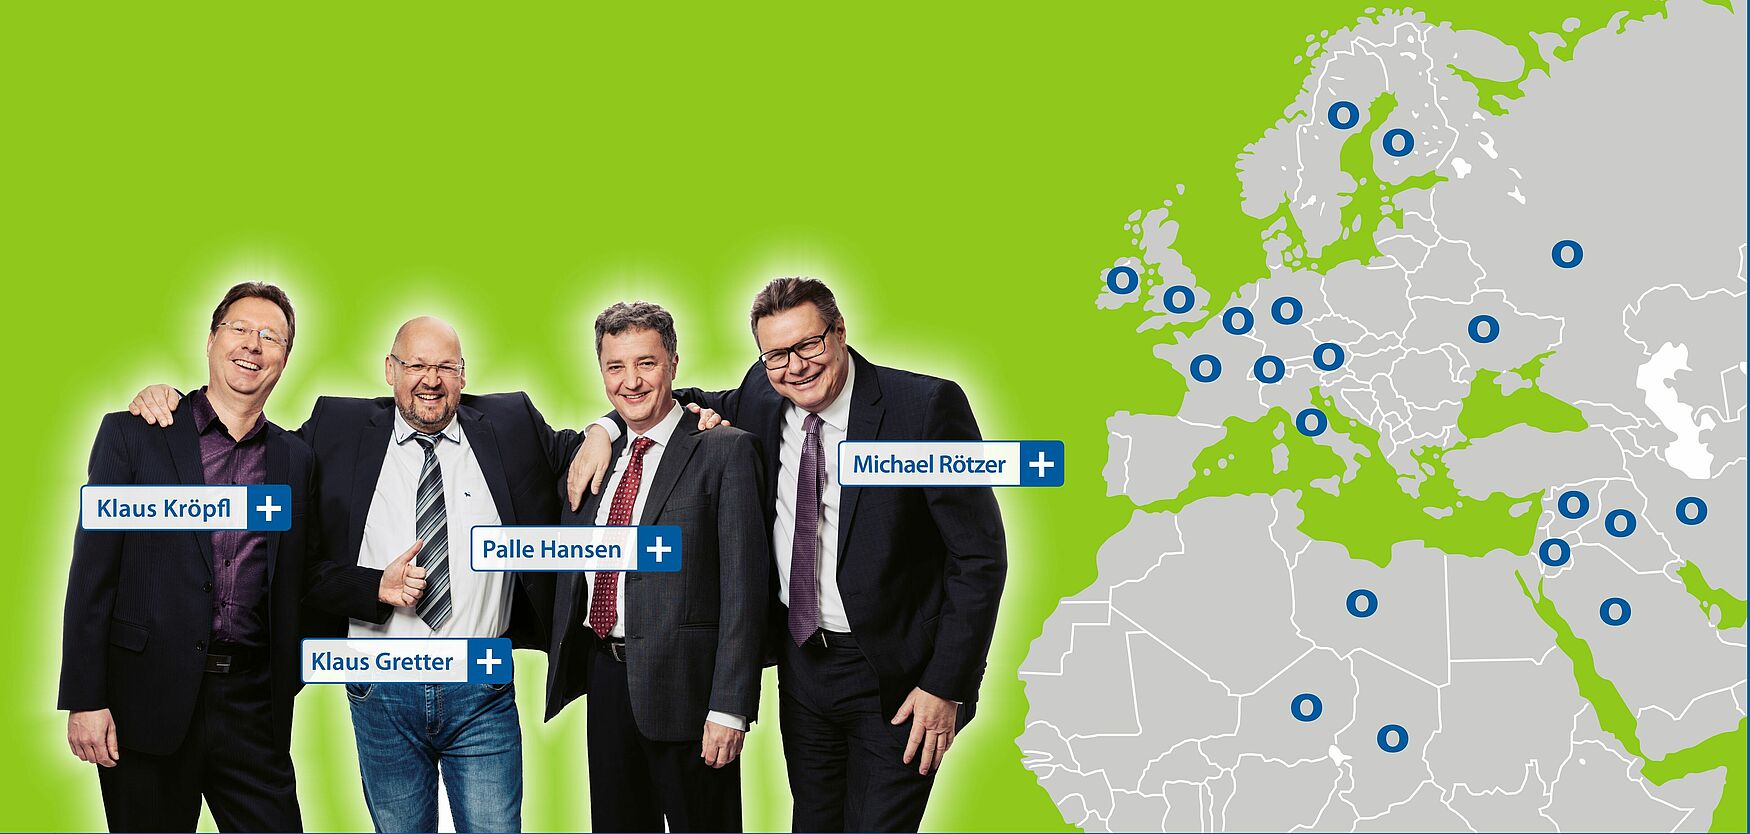 In the graphic on the left are the sales associates Klaus Kröpfl, Klaus Gretter, Palle Hansen and Michael Rötzer. To the right of them is a map of Europe, North Africa and Western Asia, where the locations of the facilities are marked with blue Ortner O’s.